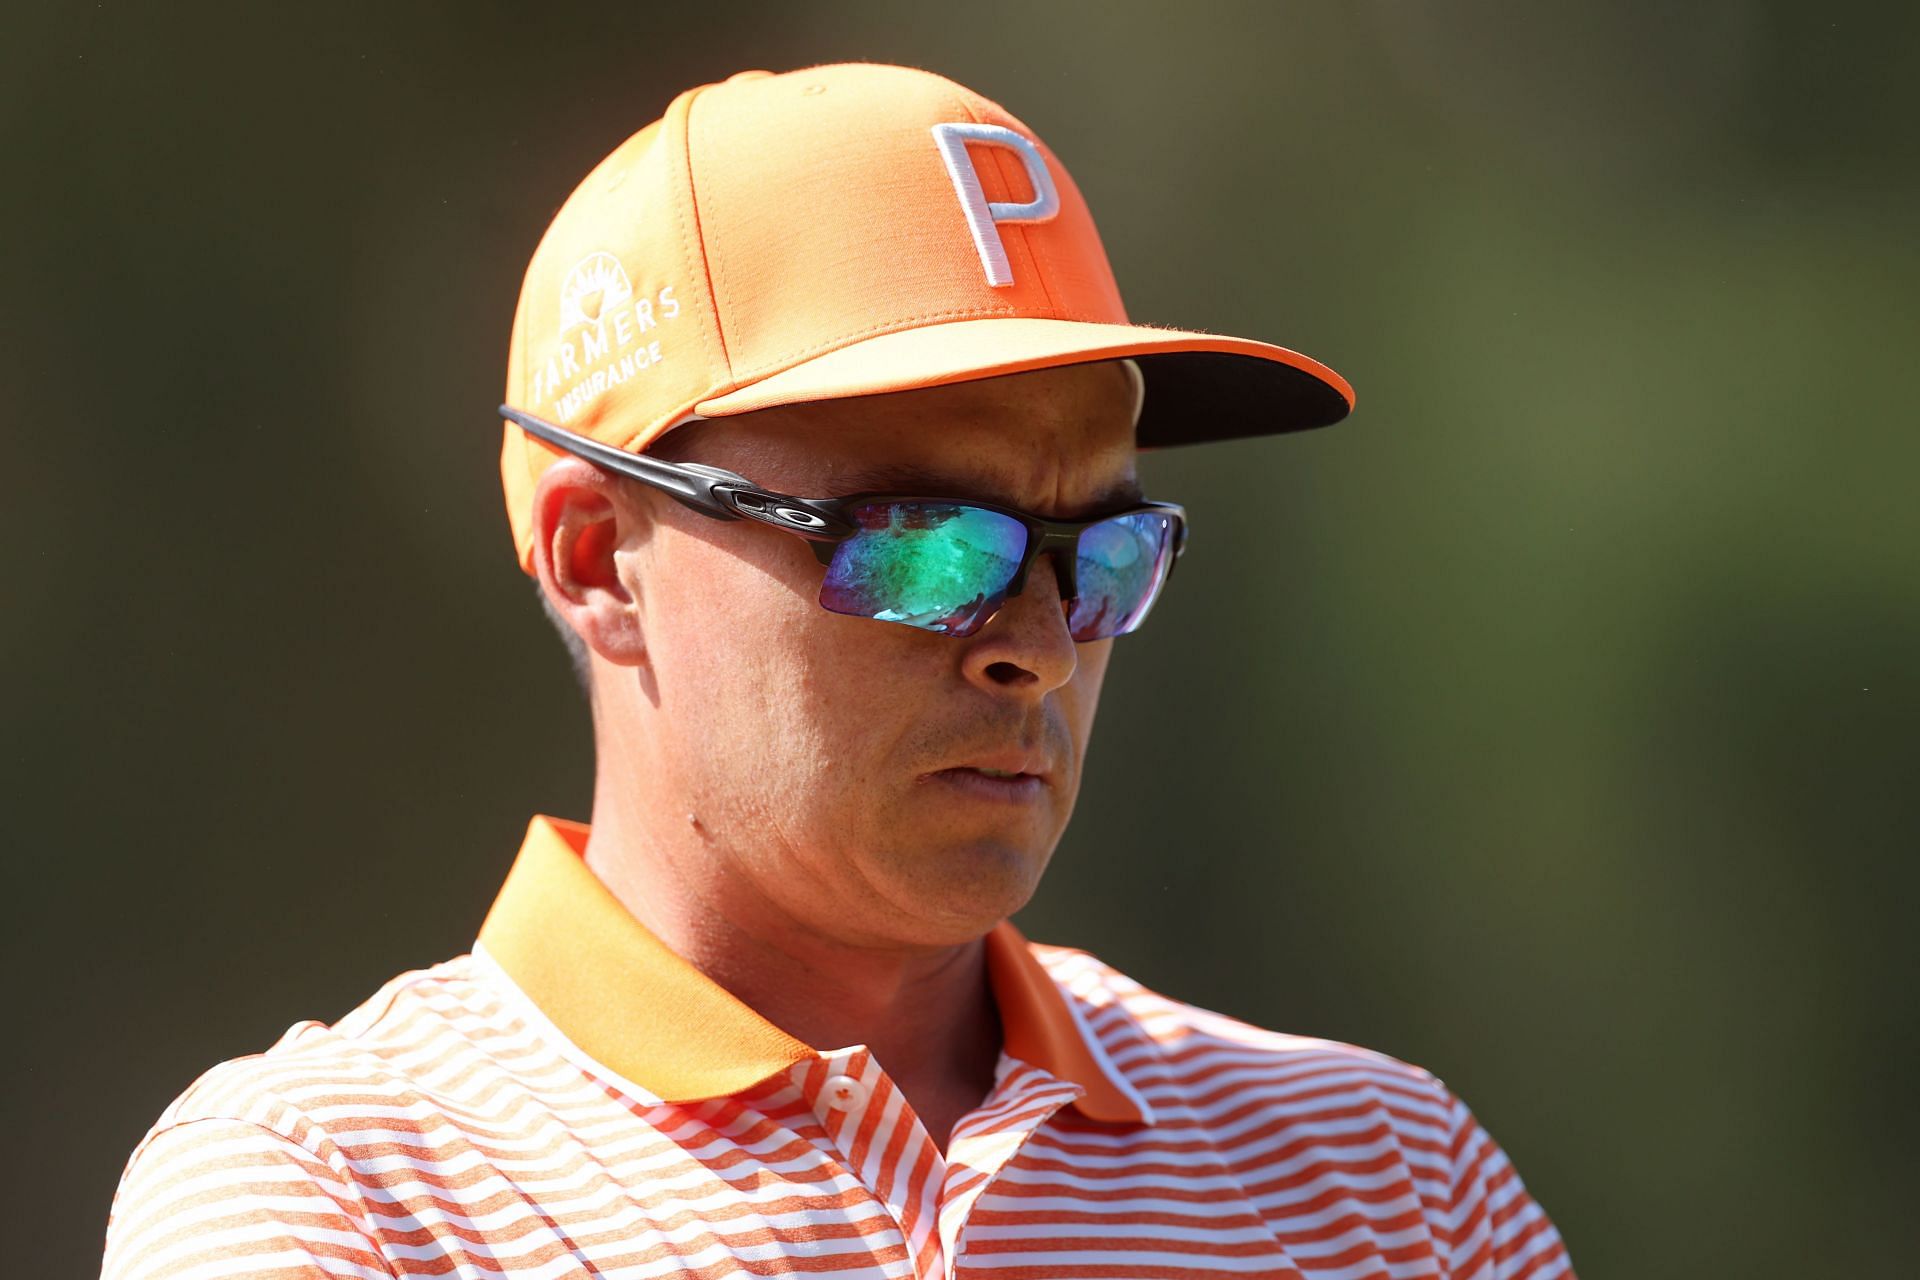 Rickie Fowler failed to hold the lead on the final day of the 123rd US Open Championship